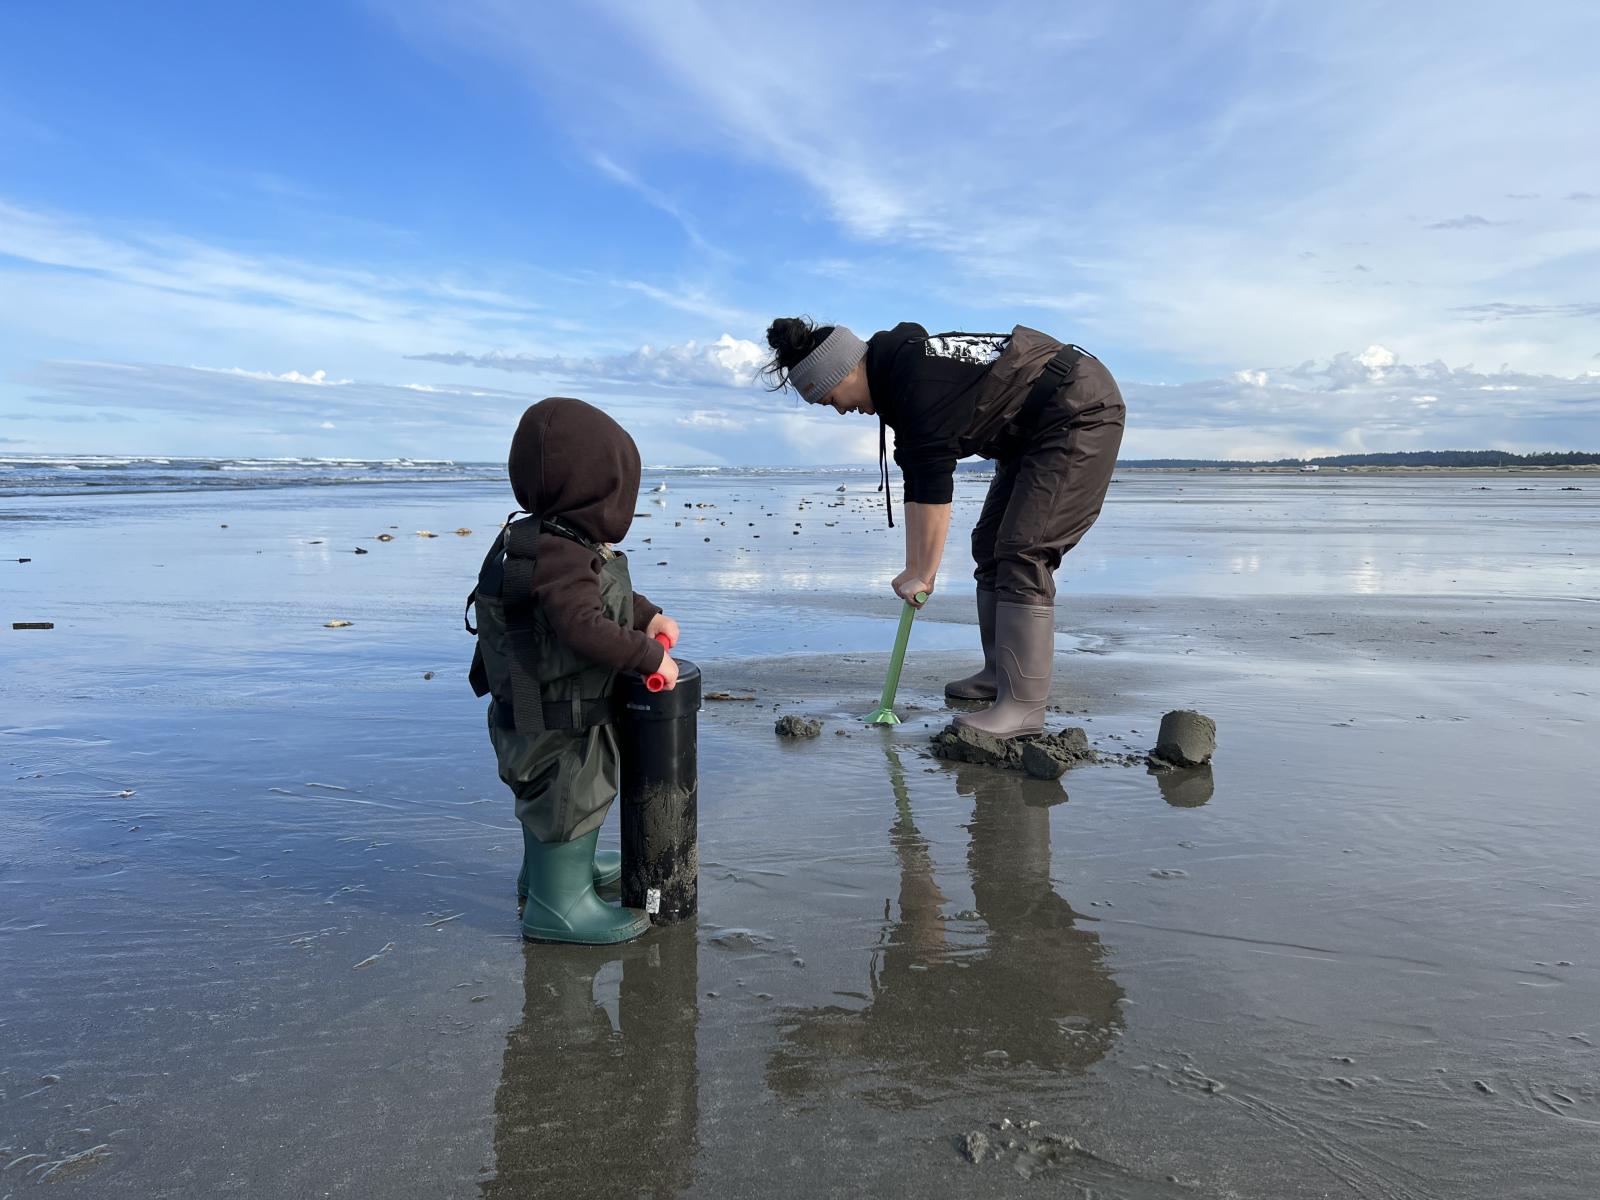 Son razor clam digging with mom